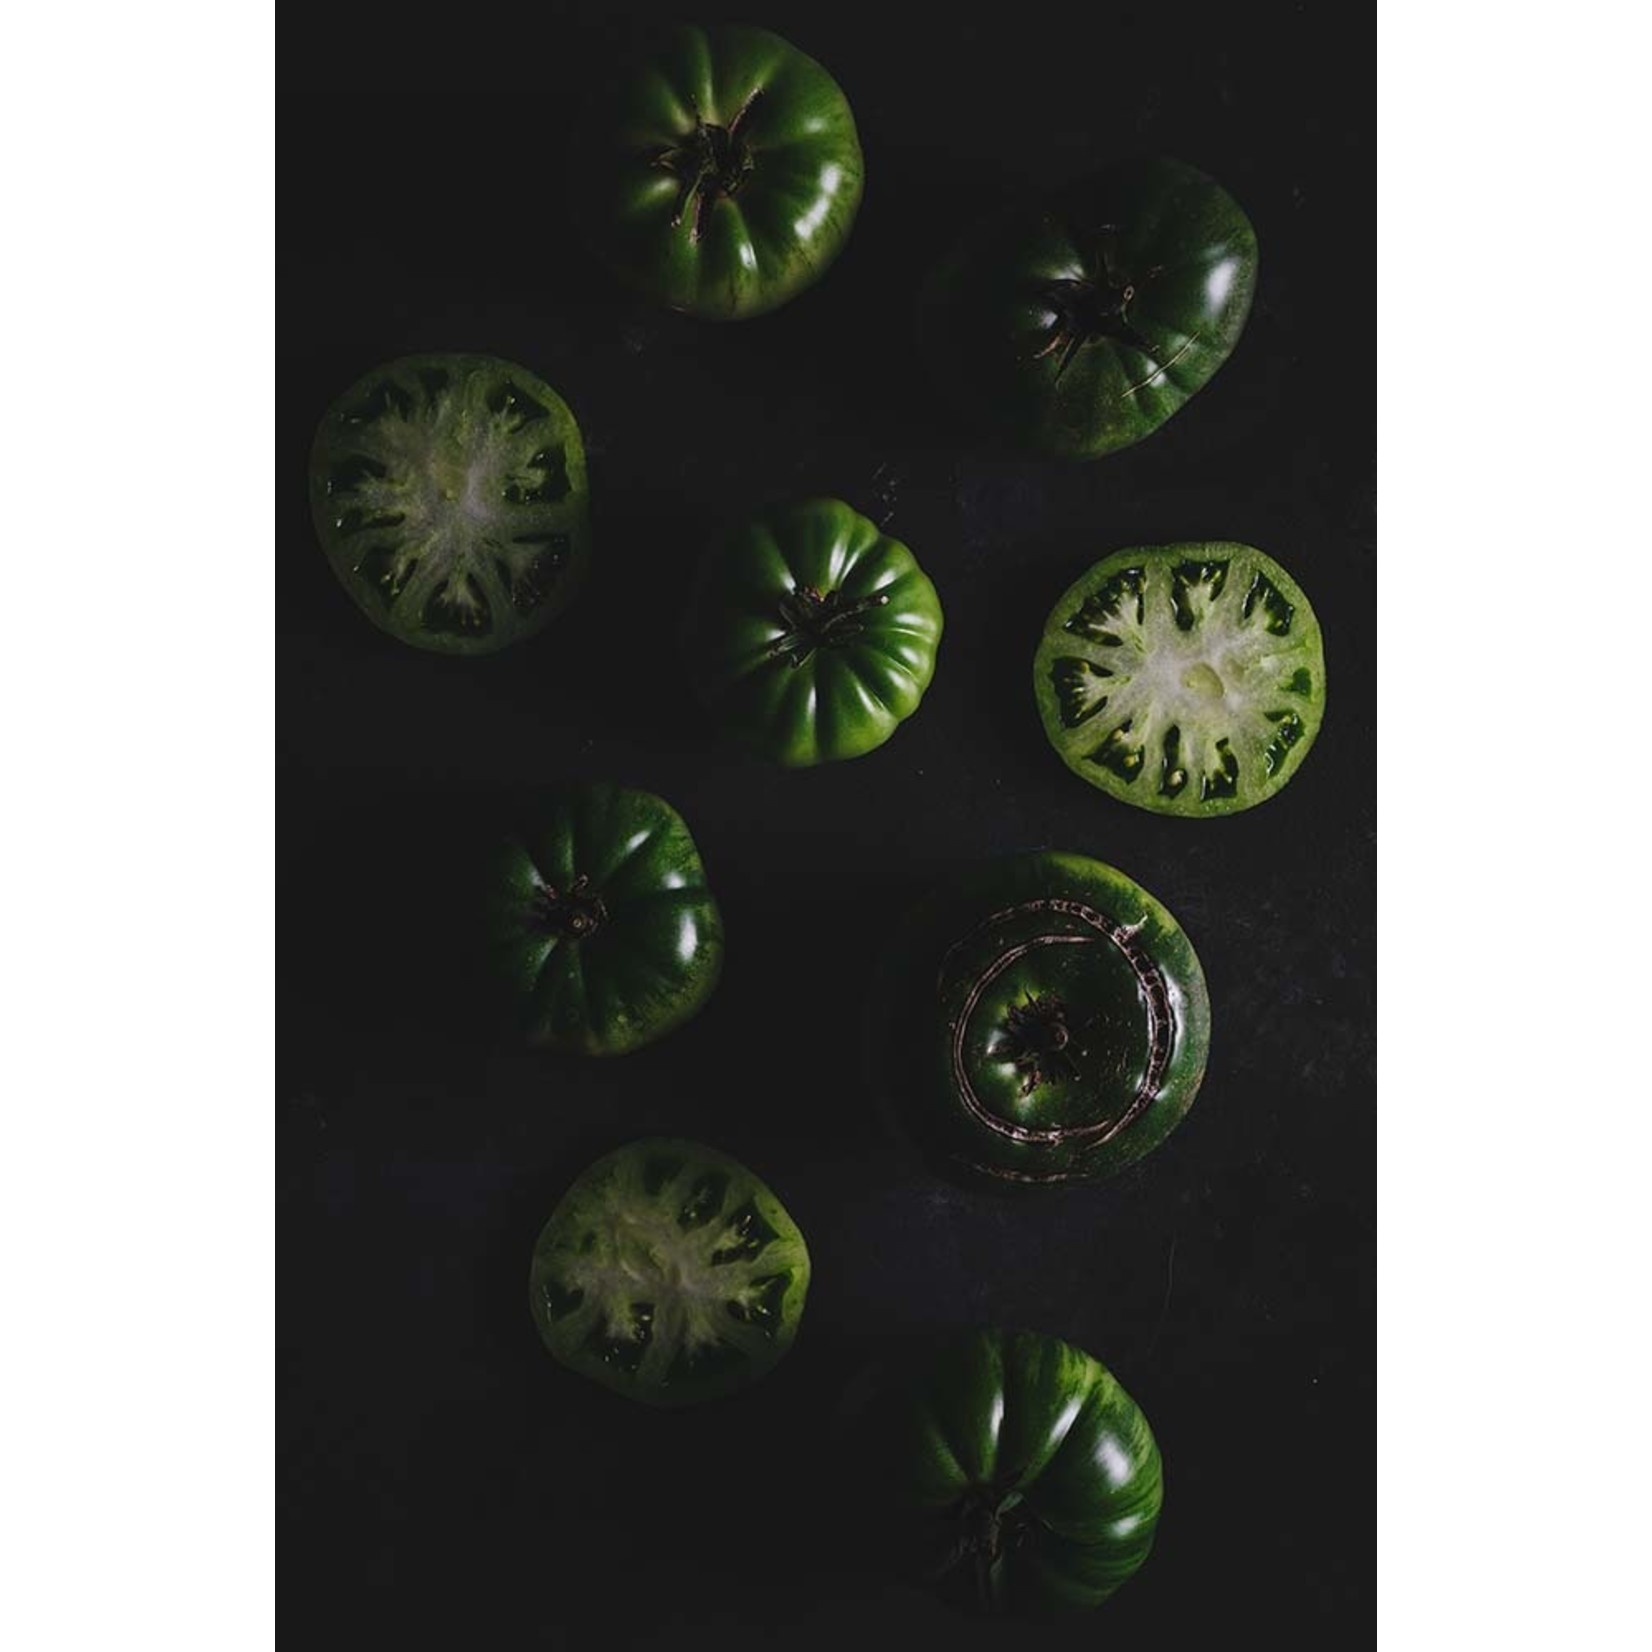 Framed Print on Rag Paper: Green Tomatoes by Jed Gordon-Moran Floated